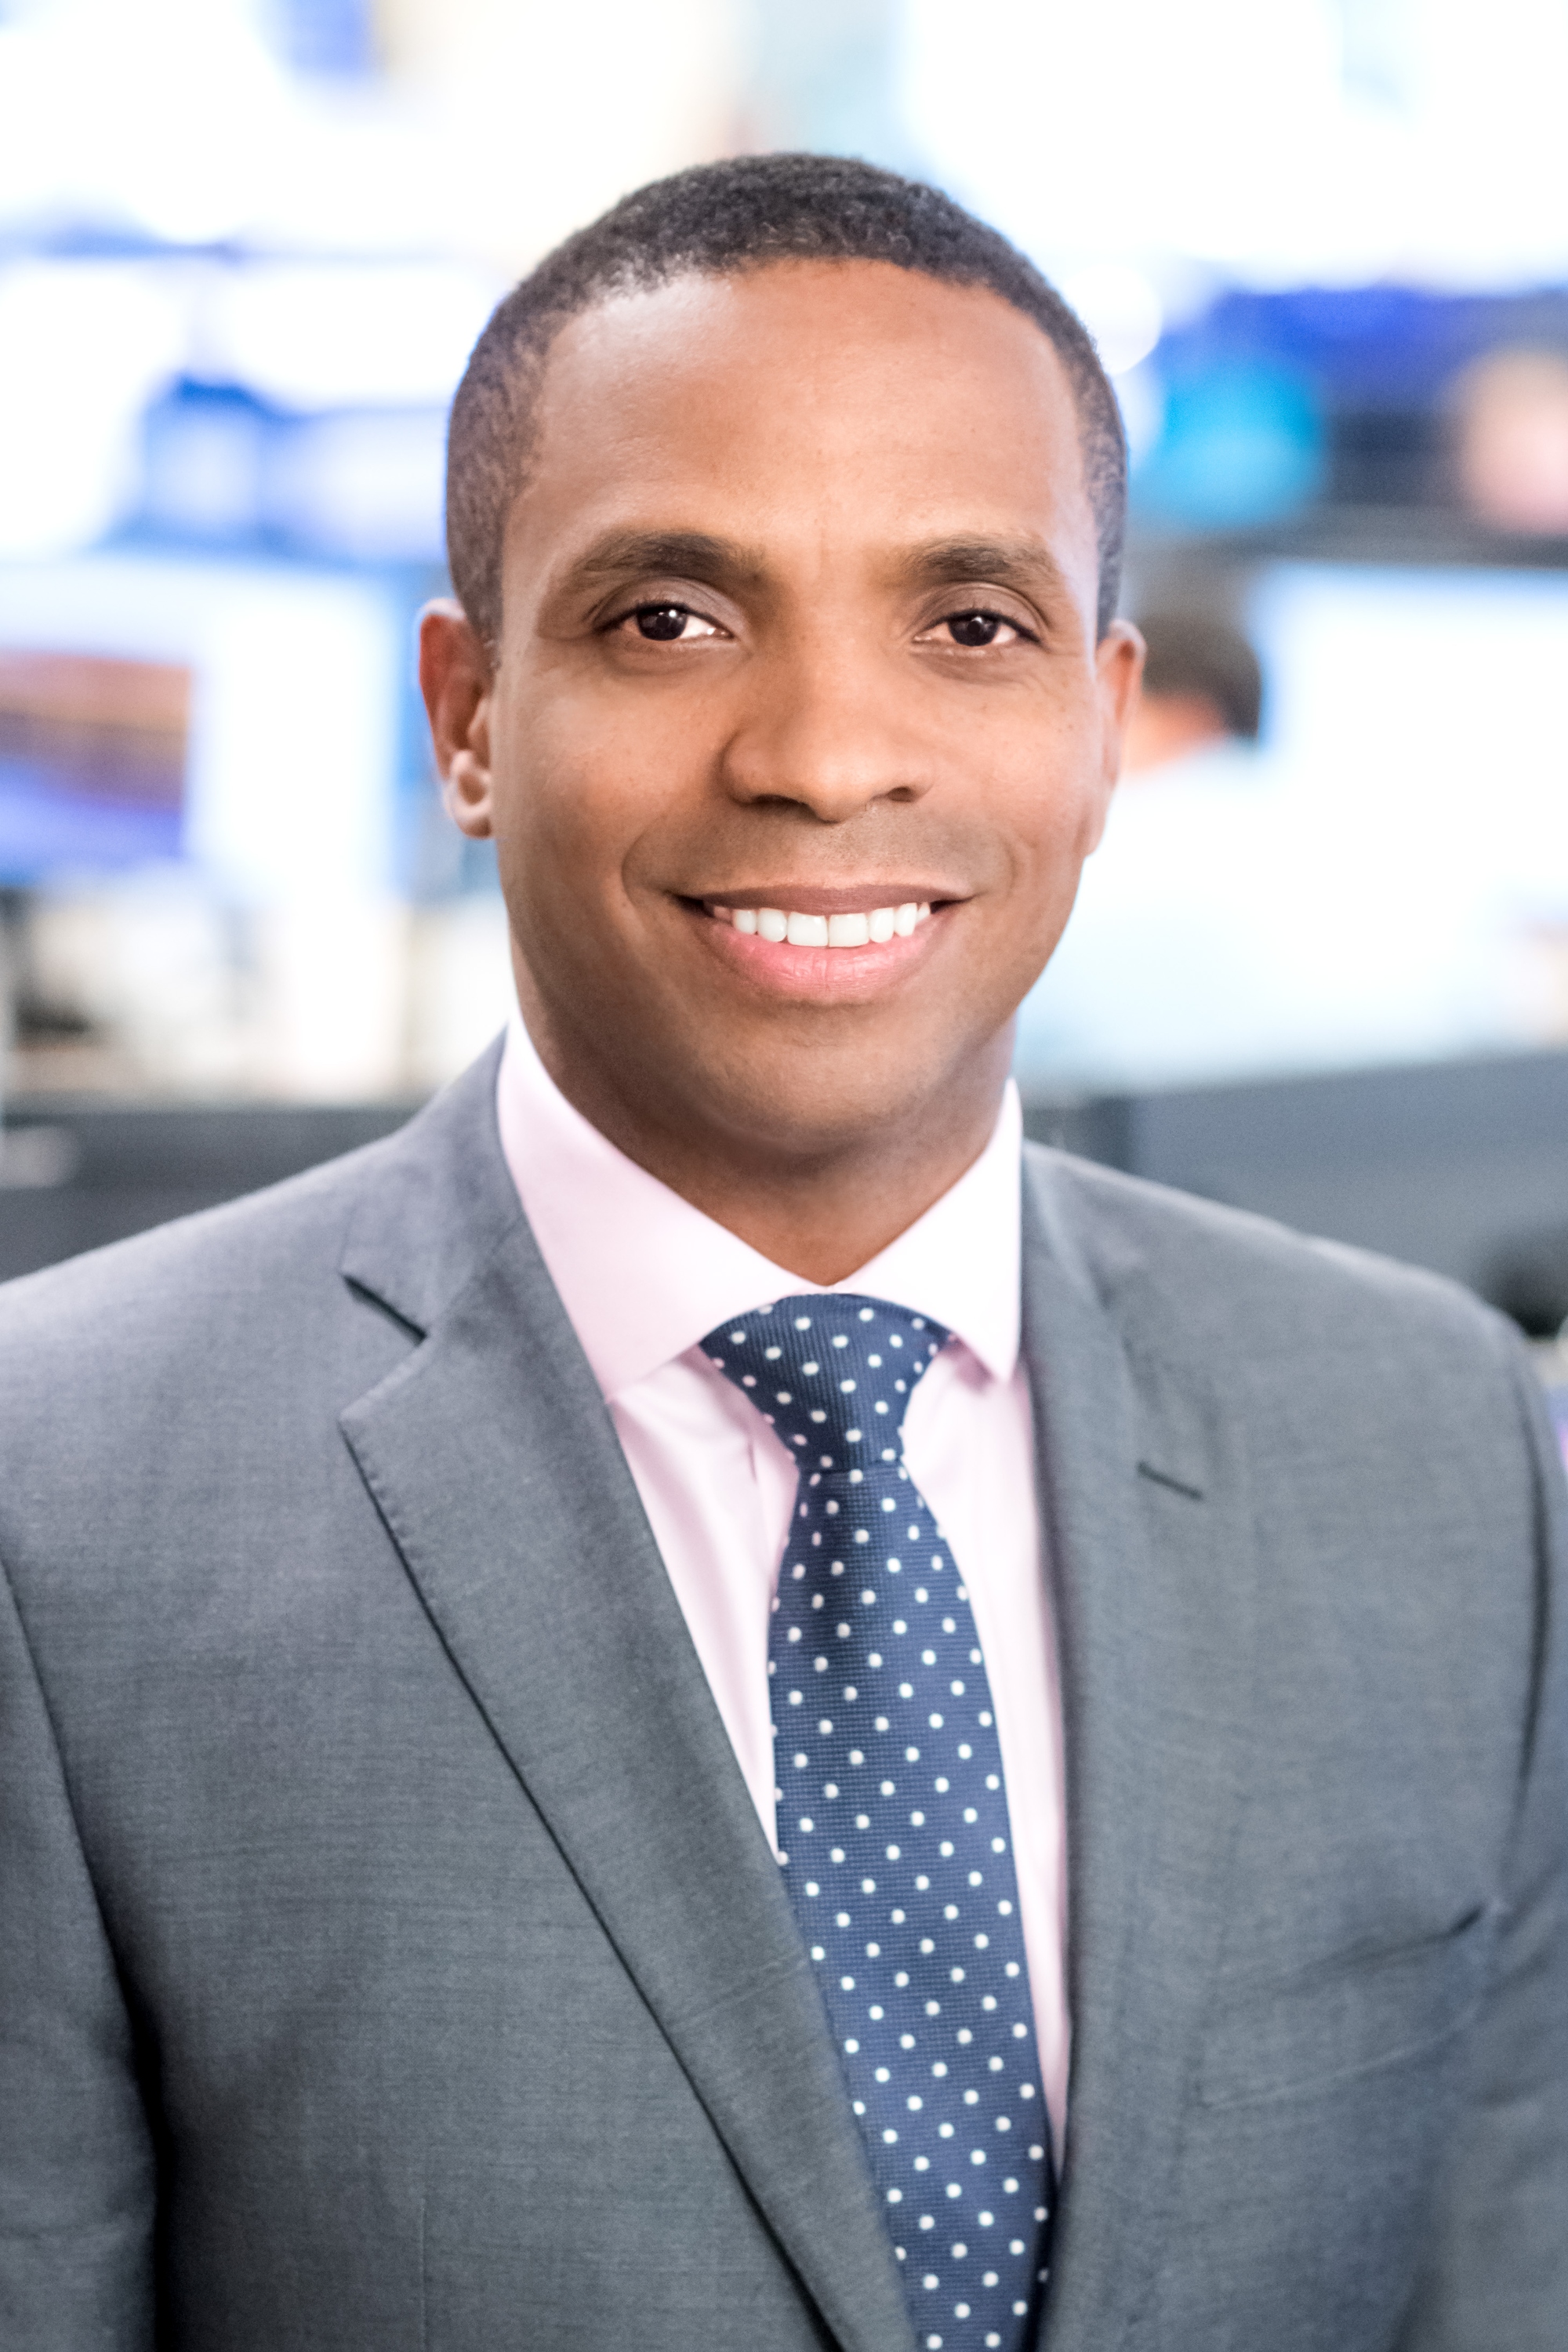 Haendel Emmanuel St. Juste is Managing Director and Senior REITs Equity Analyst at Mizuho Securities USA LLC.